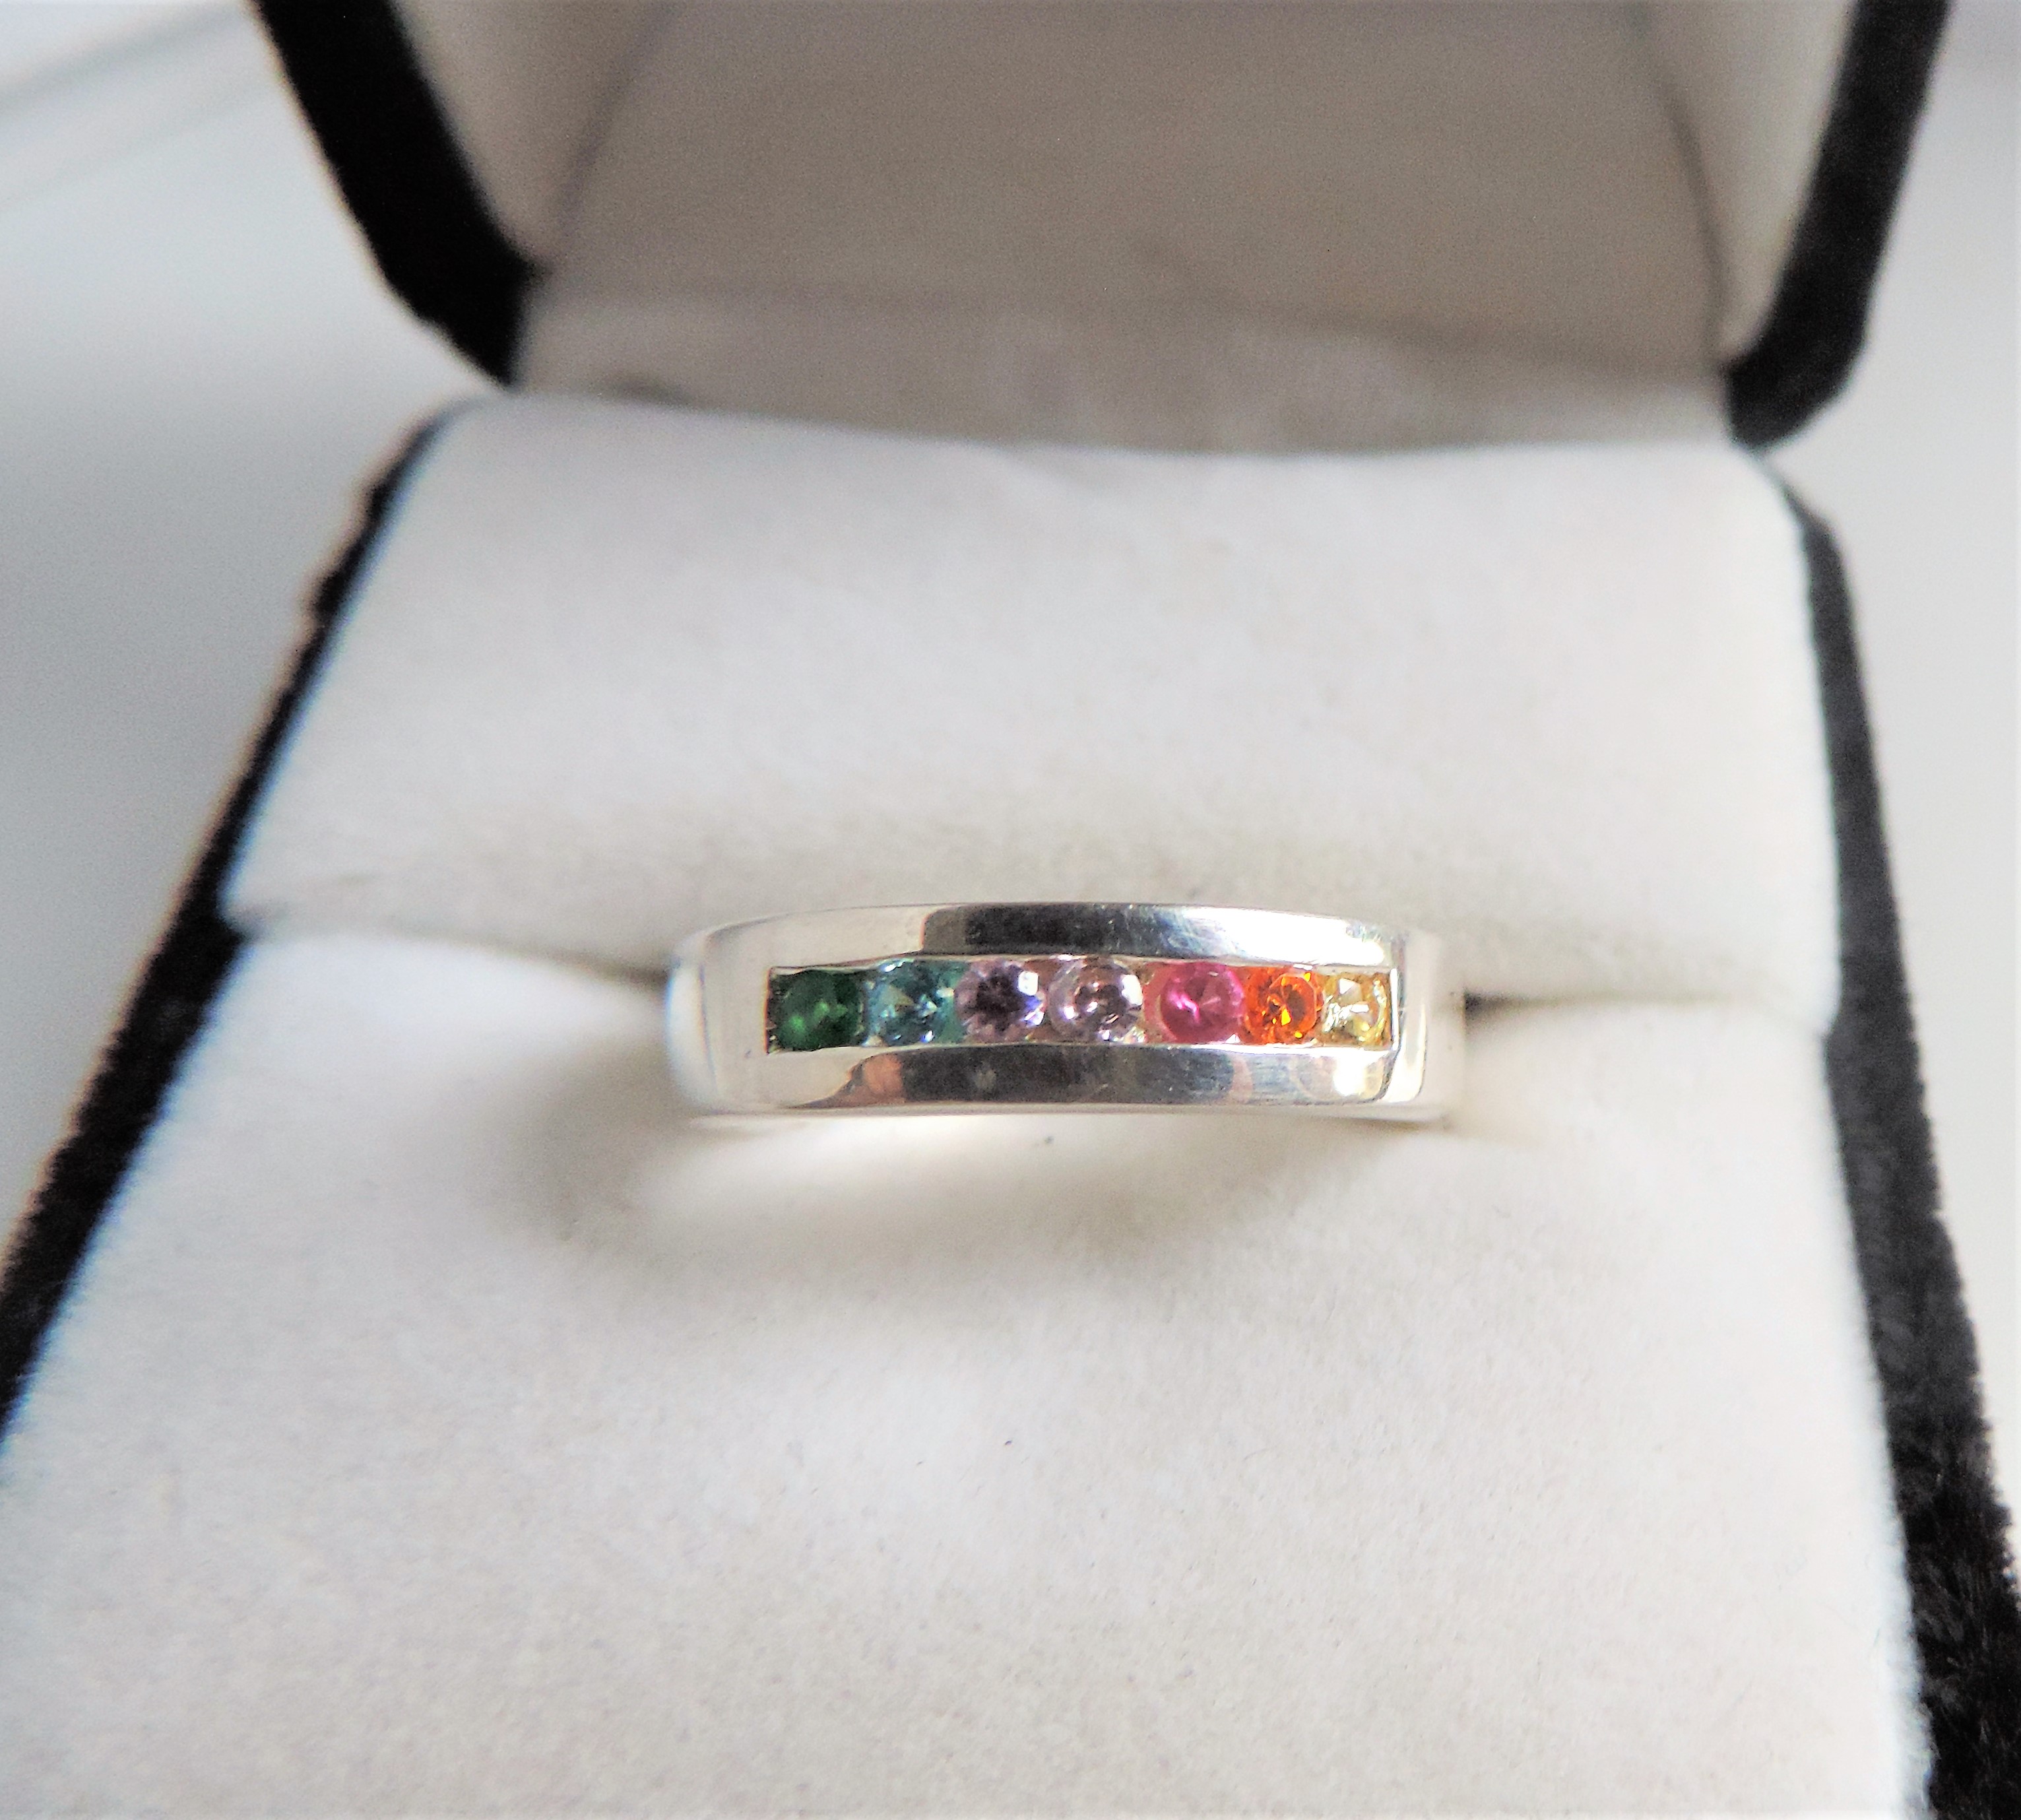 Sterling Silver Tutti Frutti Gemstone Ring New with Gift Pouch. A lovely ring set with 7 multi